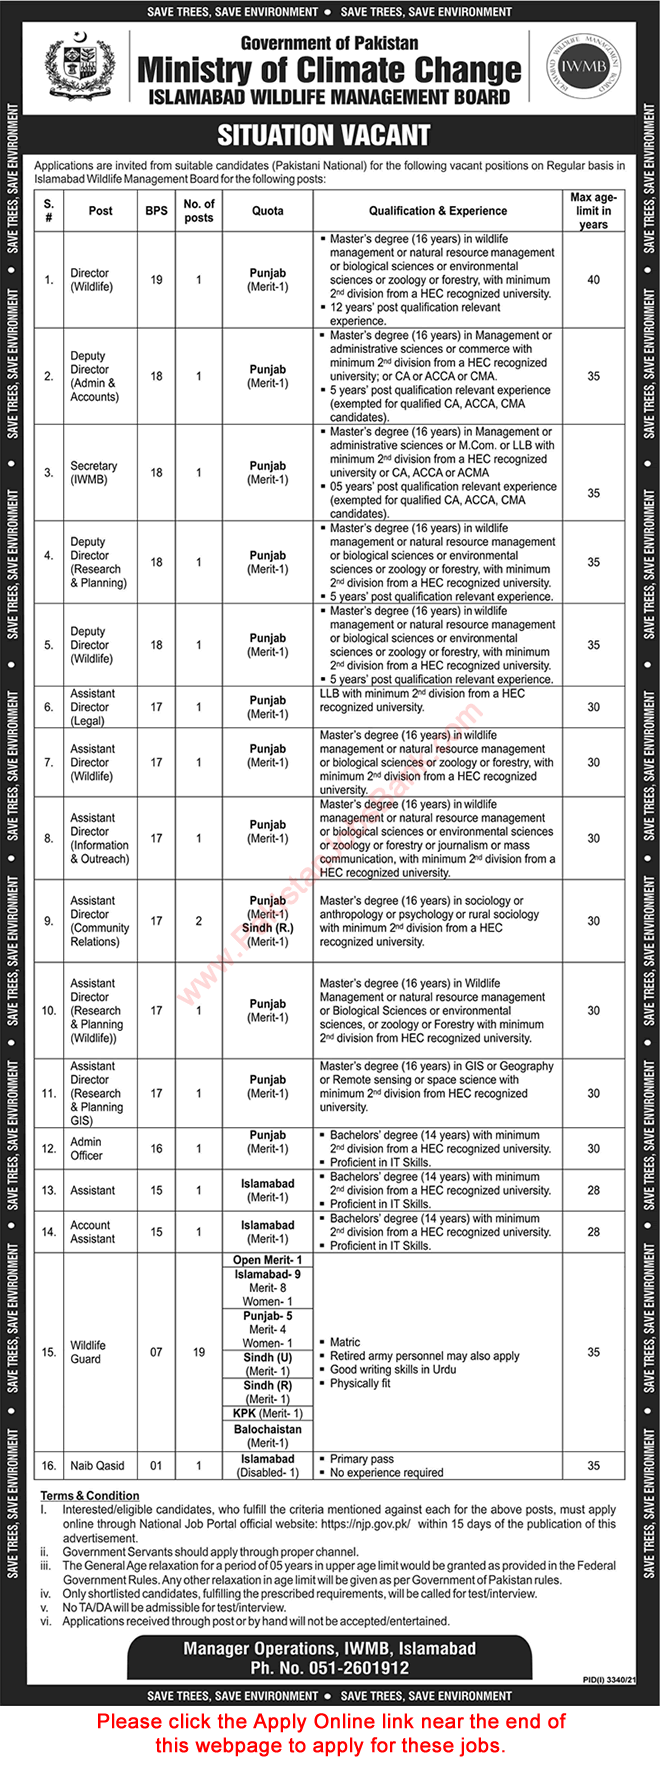 Islamabad Wildlife Management Board Jobs 2021 November IWMB Apply Online Ministry of Climate Change Latest